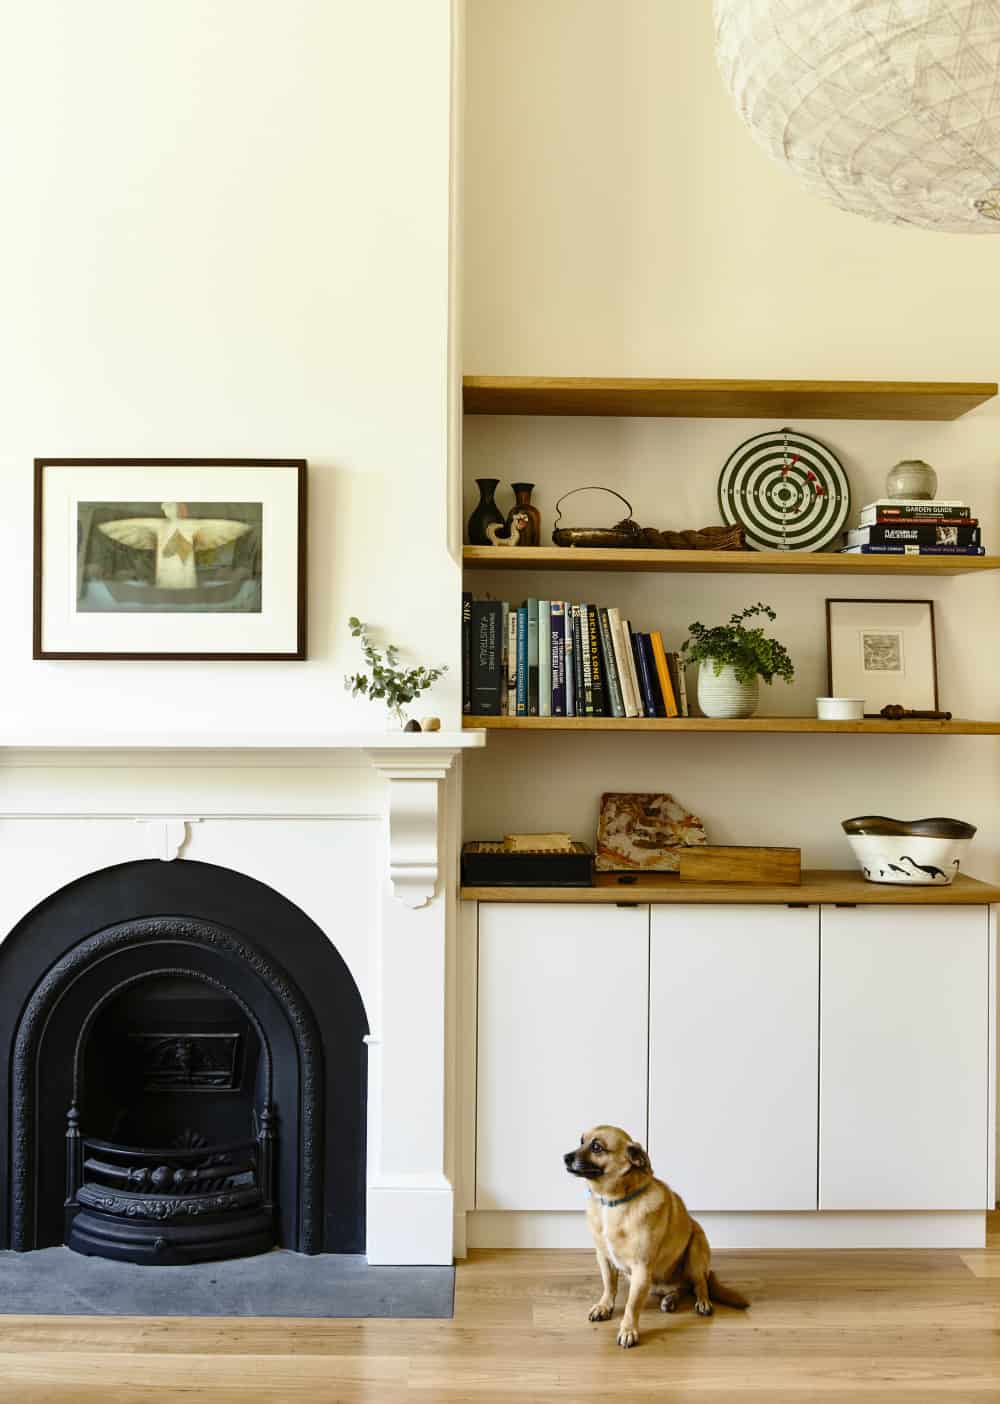 A classic fireplace becomes a design element of the room